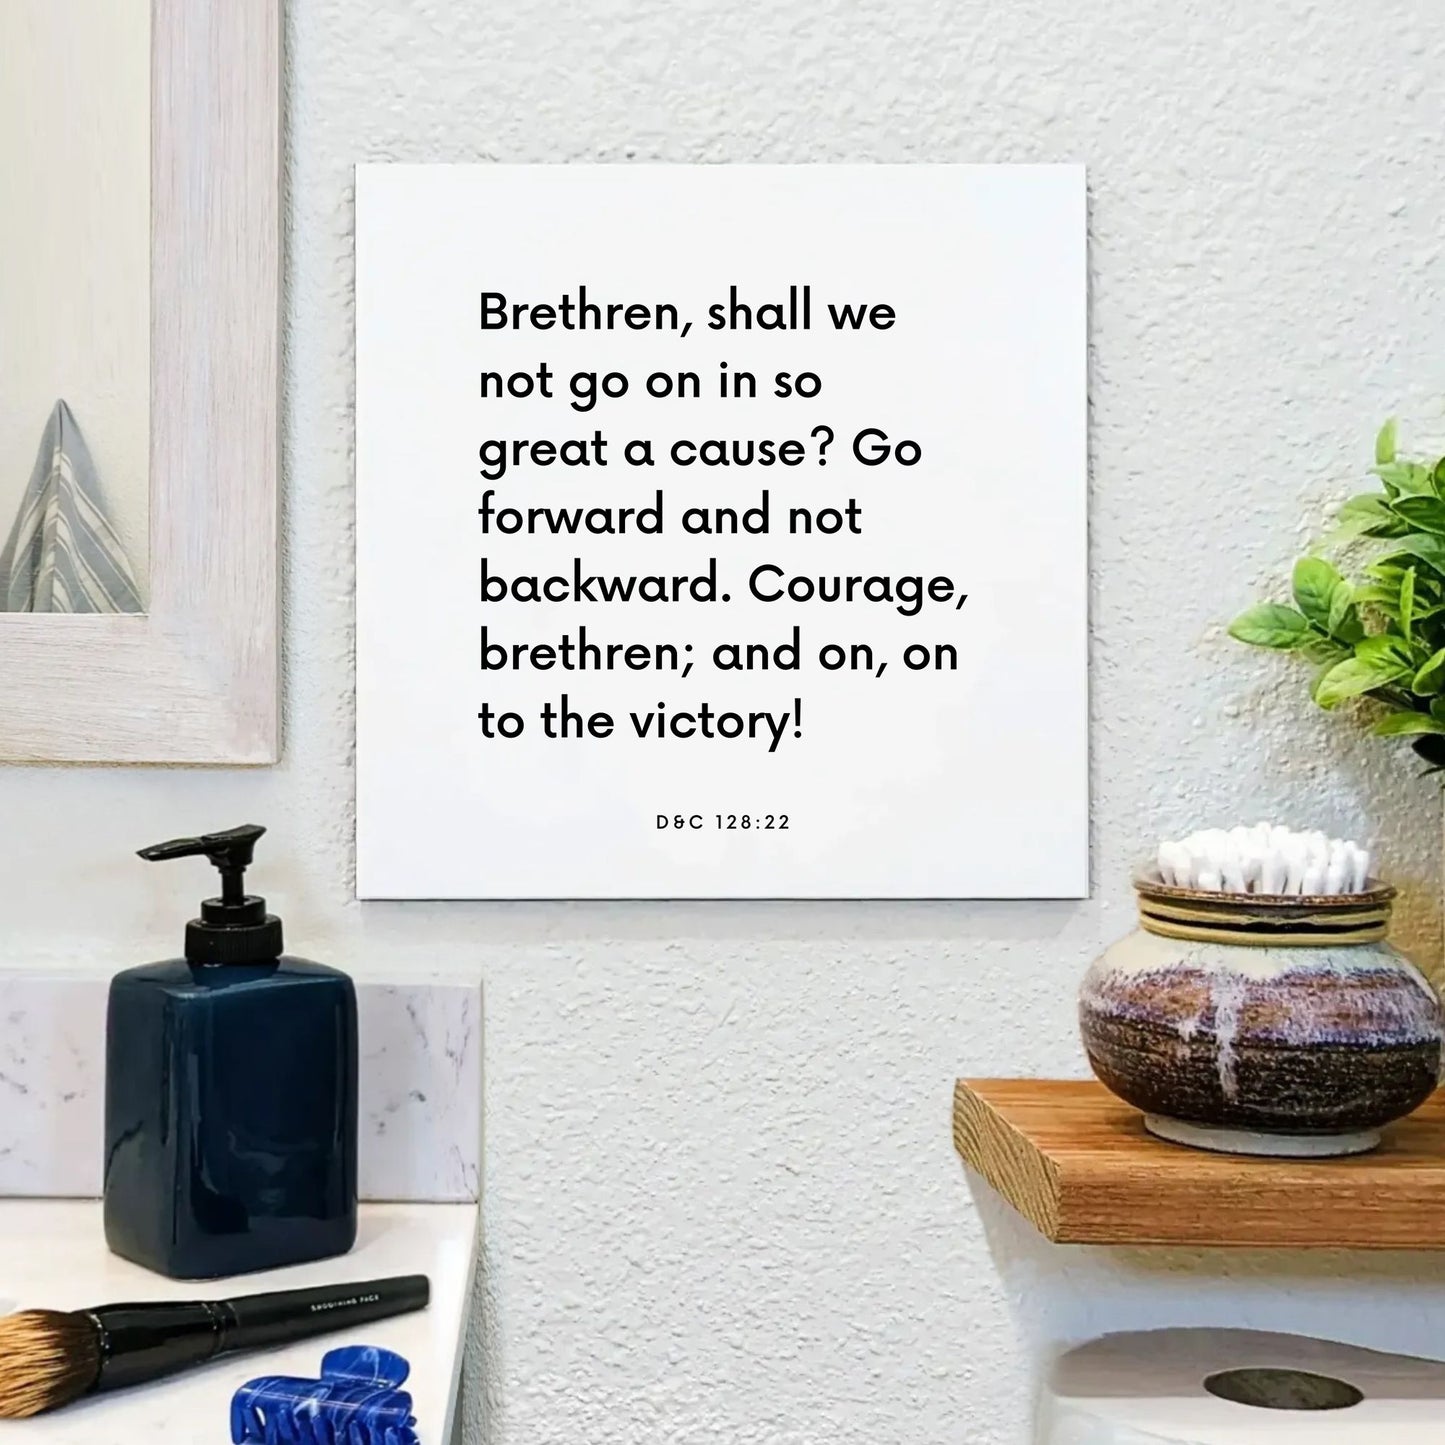 Bathroom mouting of the scripture tile for D&C 128:22 - "Brethren, shall we not go on in so great a cause?"